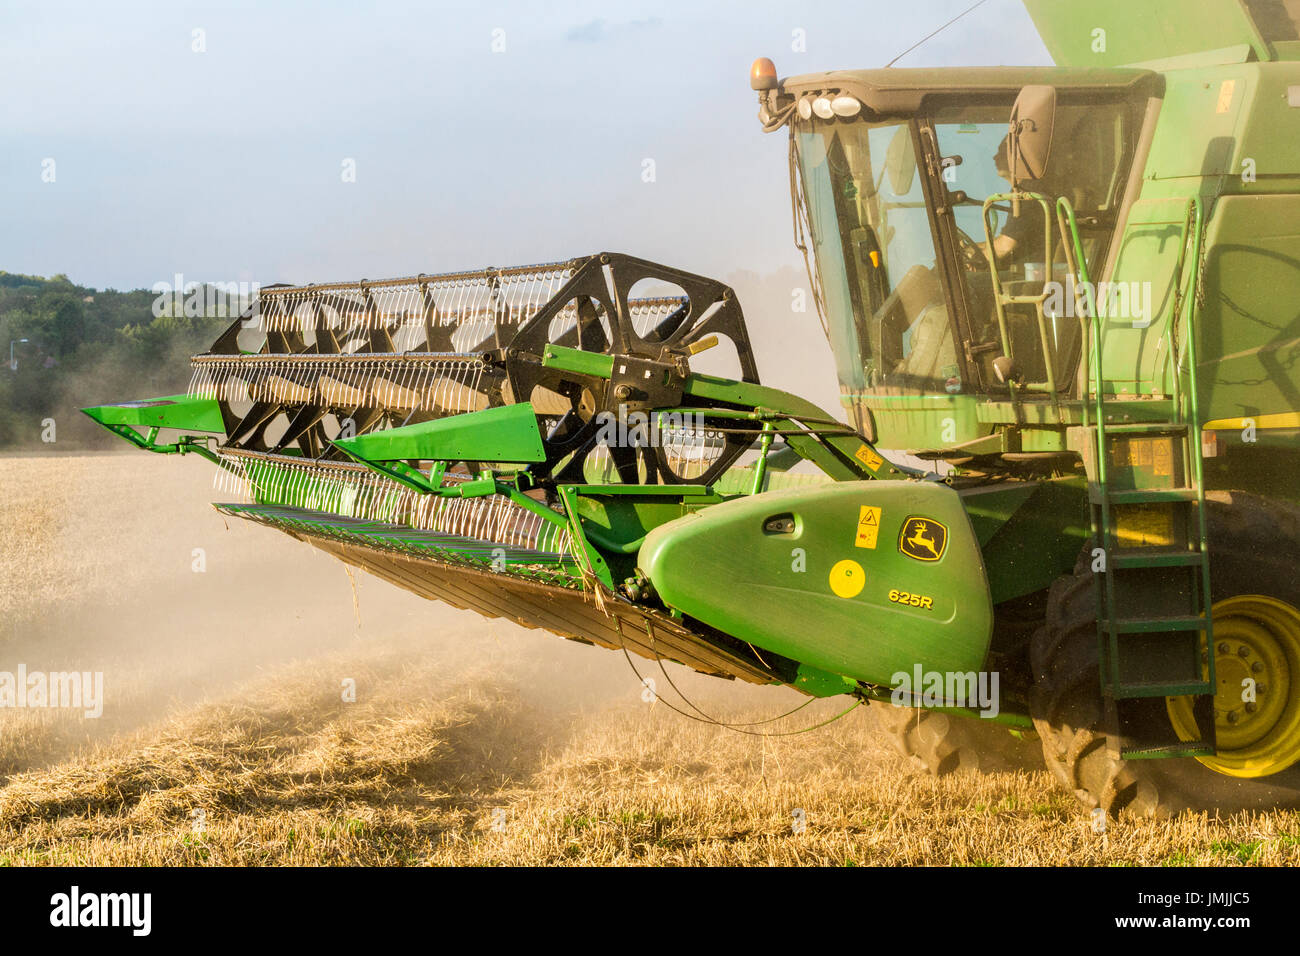 Raised header showing reel and cutter bar, and cab of a combine harvester during a wheat harvest, England, UK Stock Photo